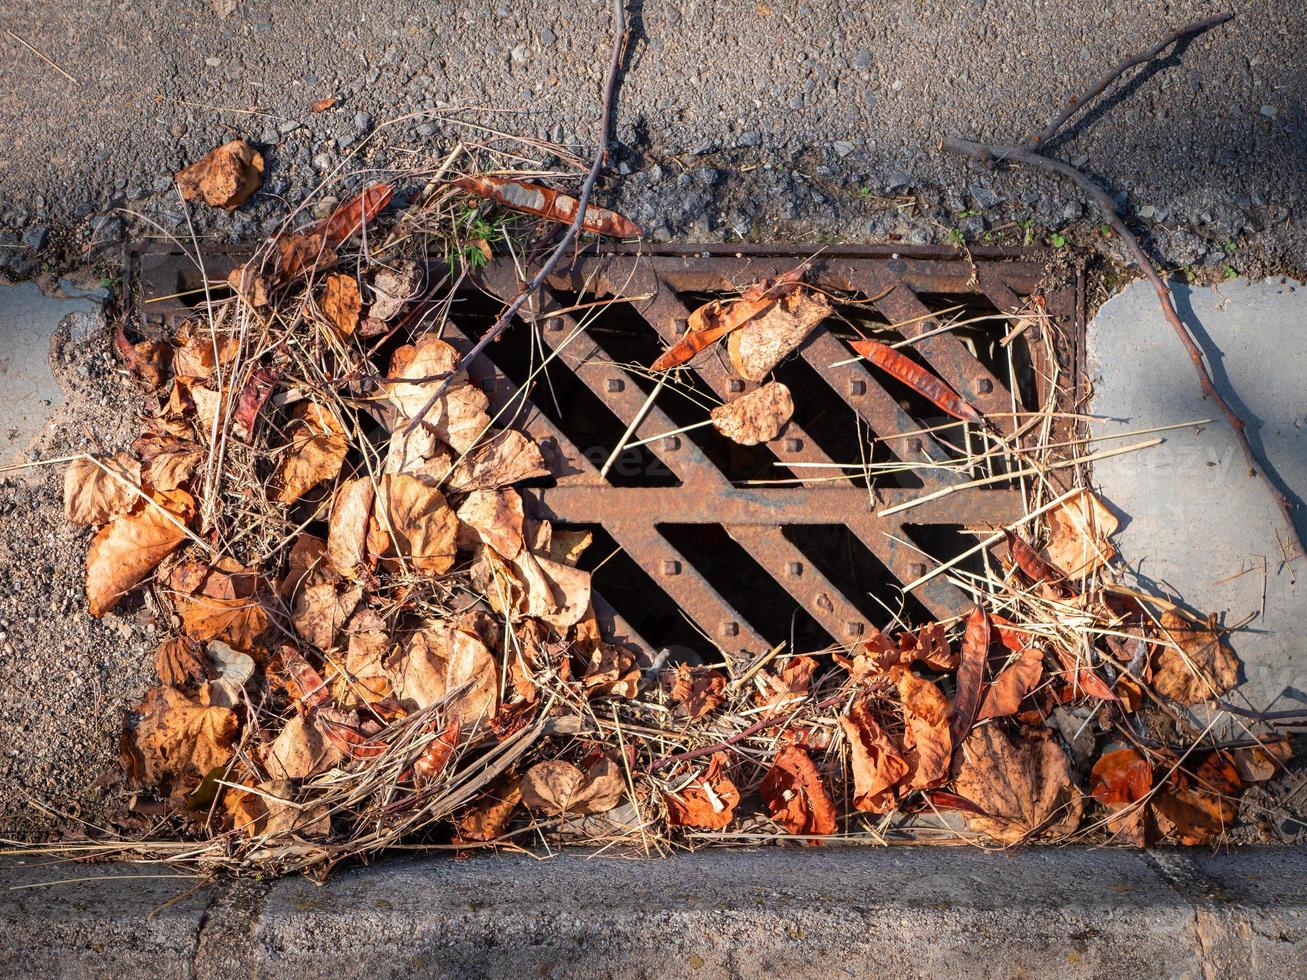 Rusty sewer grating covered with various dry fallen leaves and twigs photo